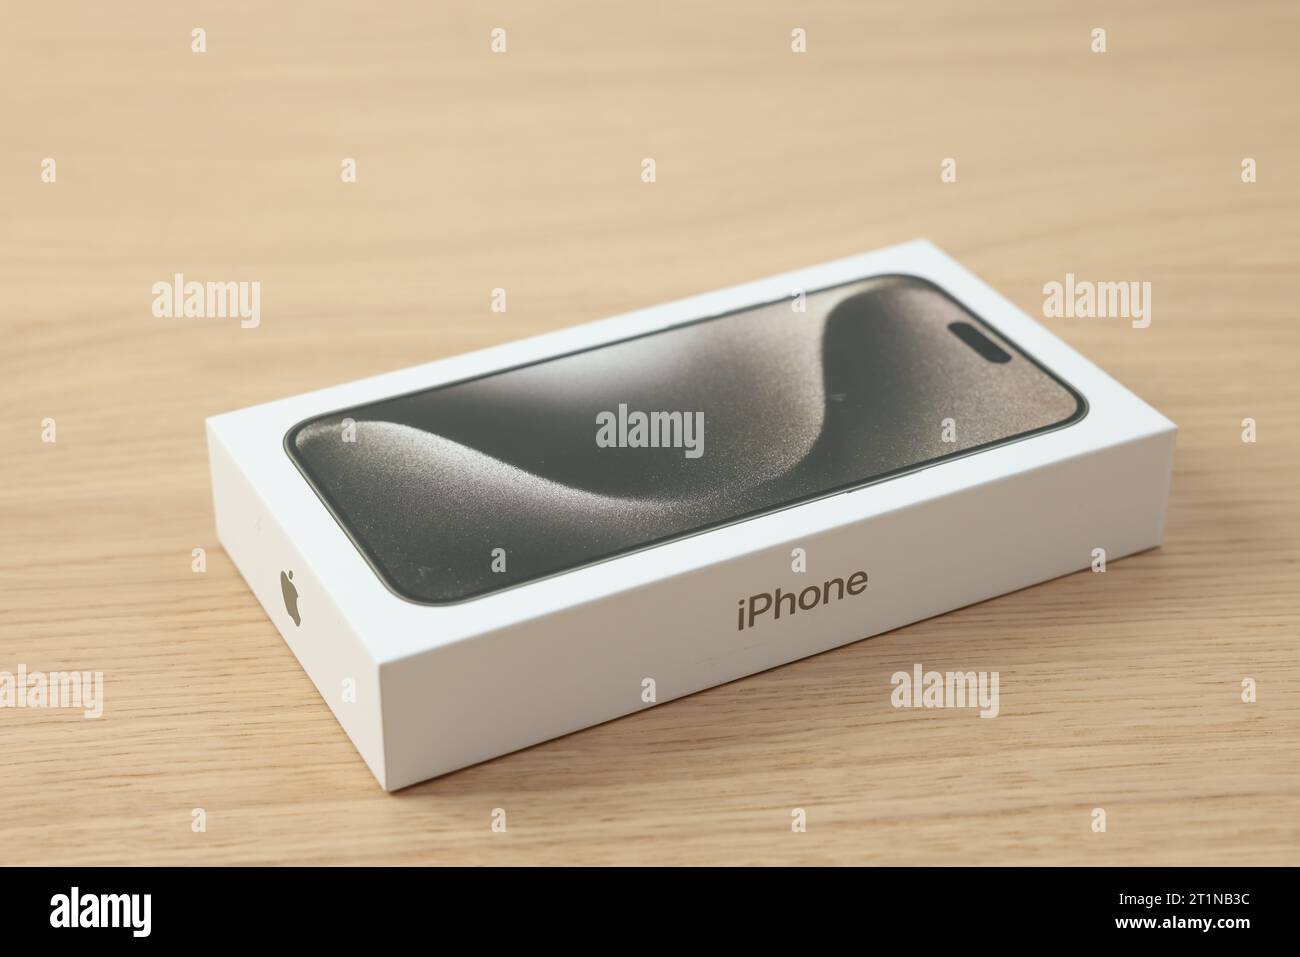 Paris, France - Sep 17, 2022: Display of the new Apple iPhone 15 Pro Max  featuring Asian characters during unboxing and setup Stock Photo - Alamy